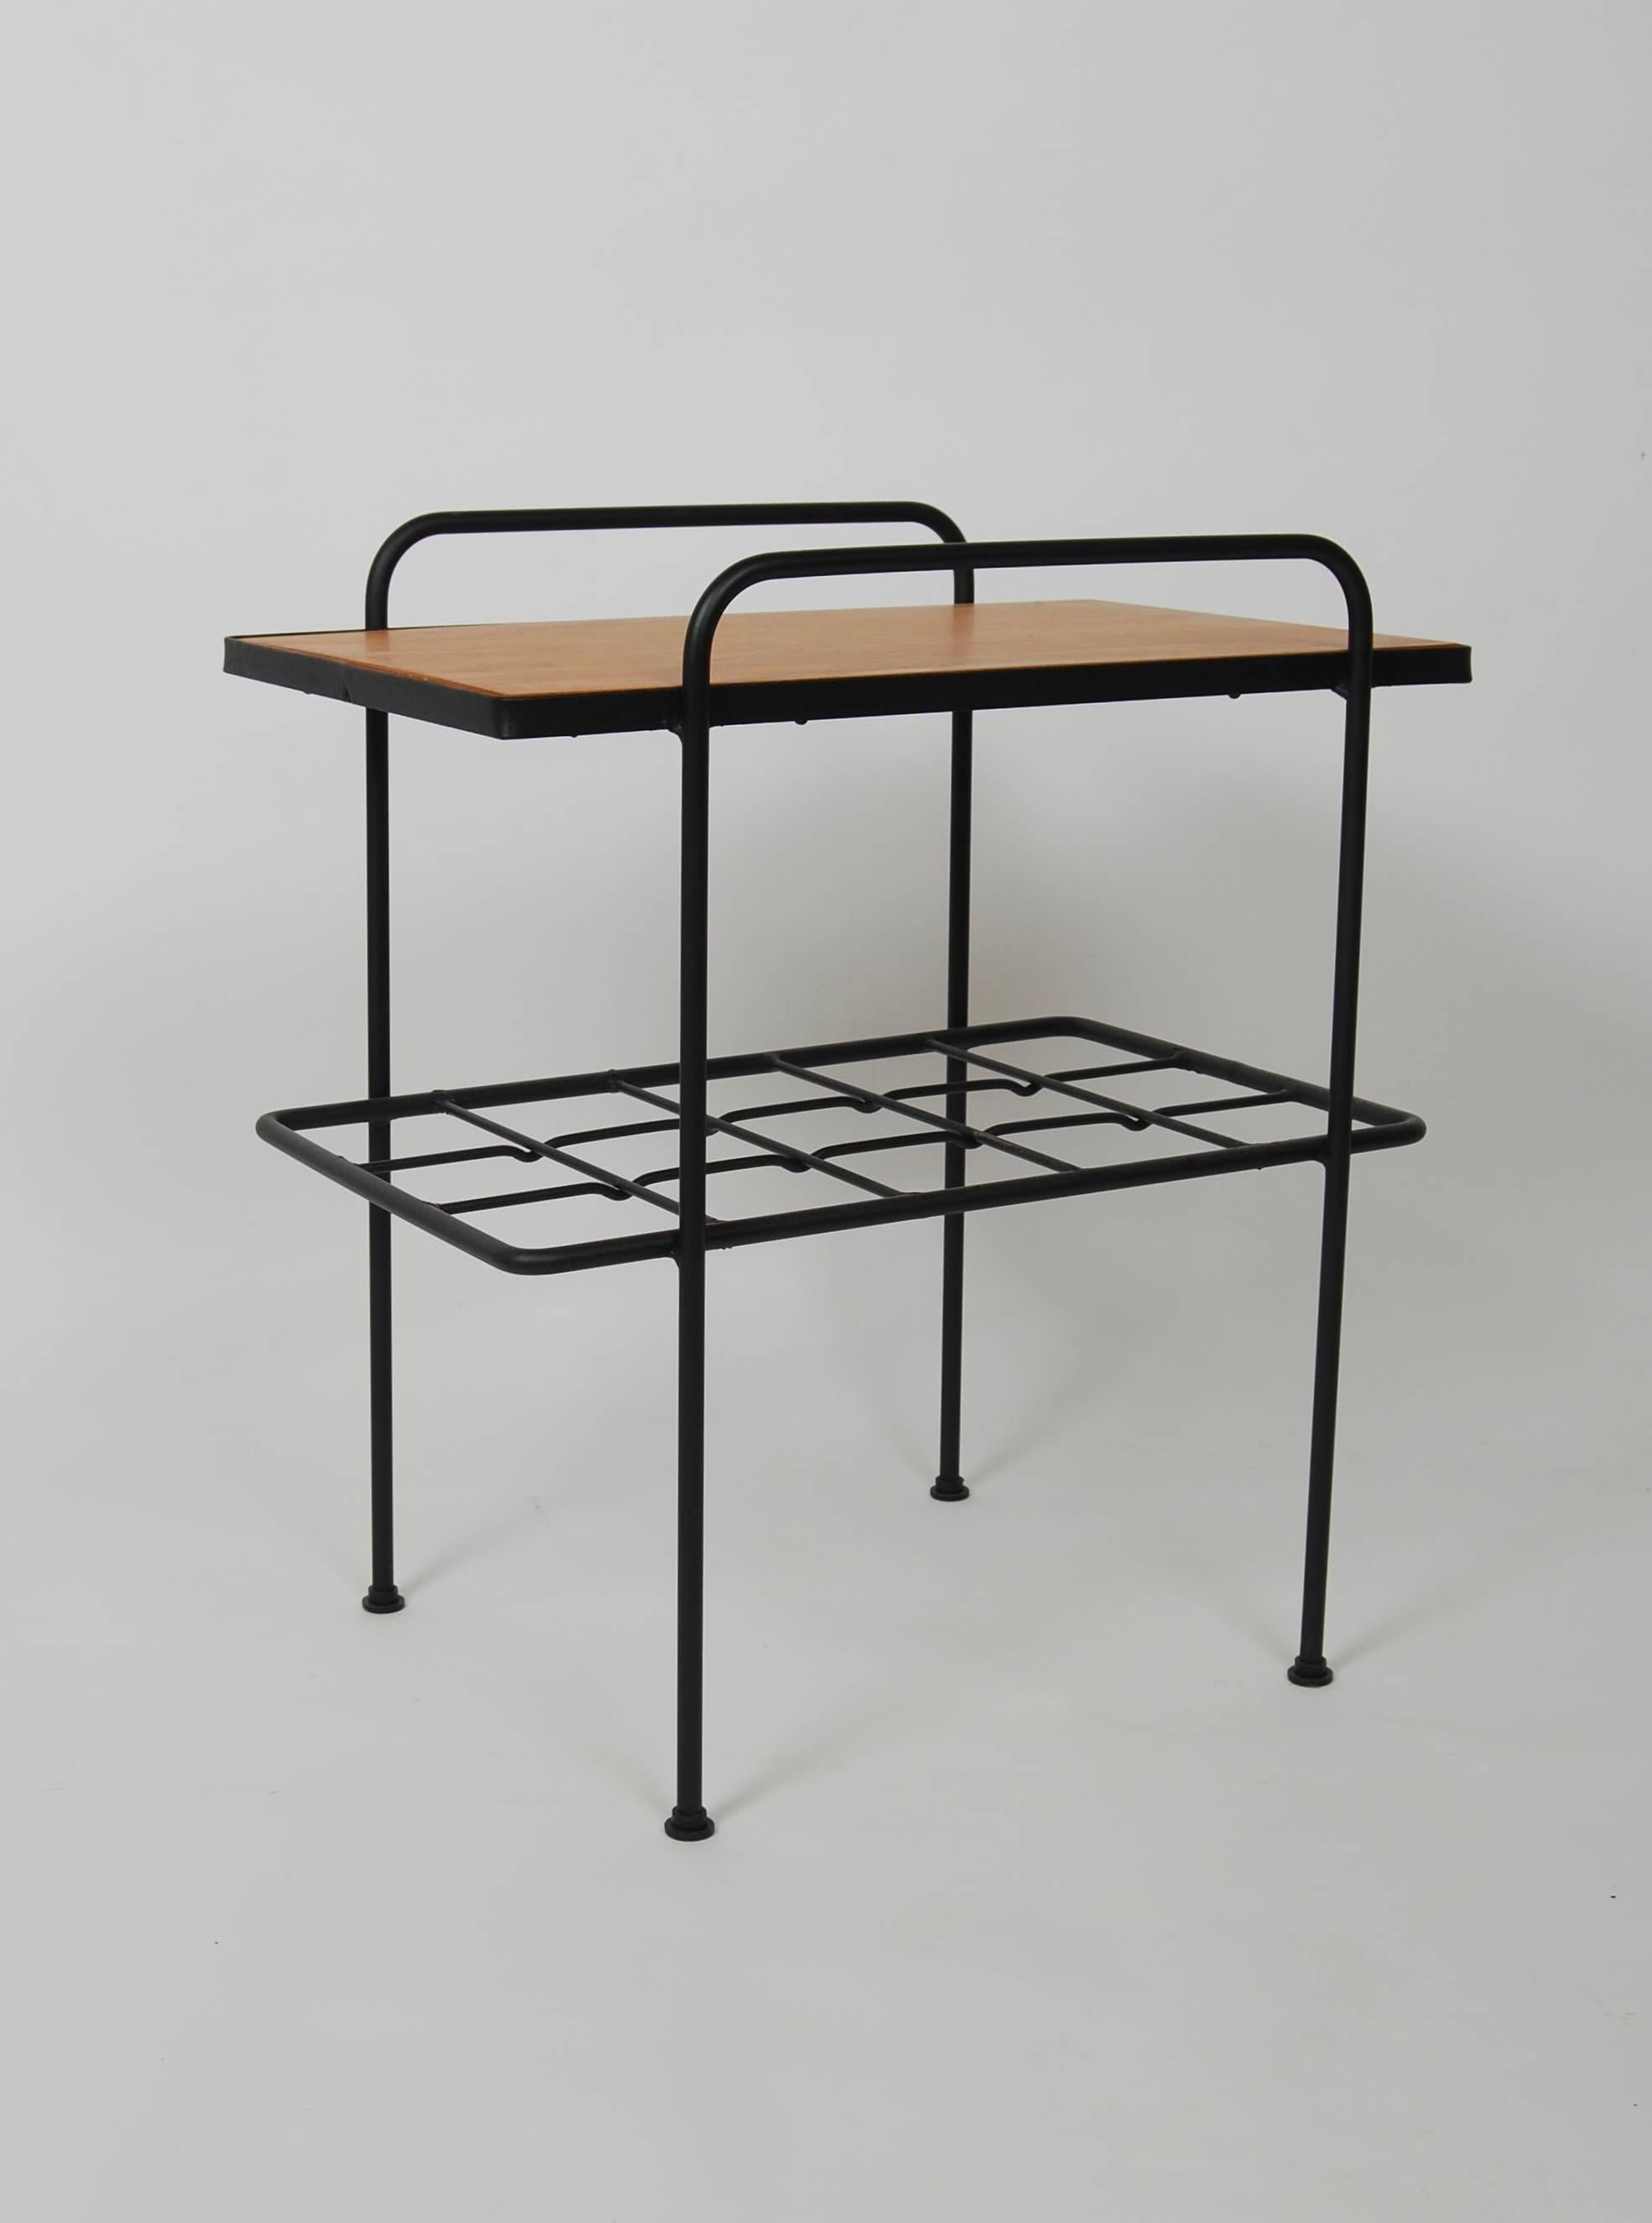 Black lacquered iron frame with heavy wire grid shelf with honey colored birch wood top by Inco of California. Part of the early postwar design style emerging out of Southern California.